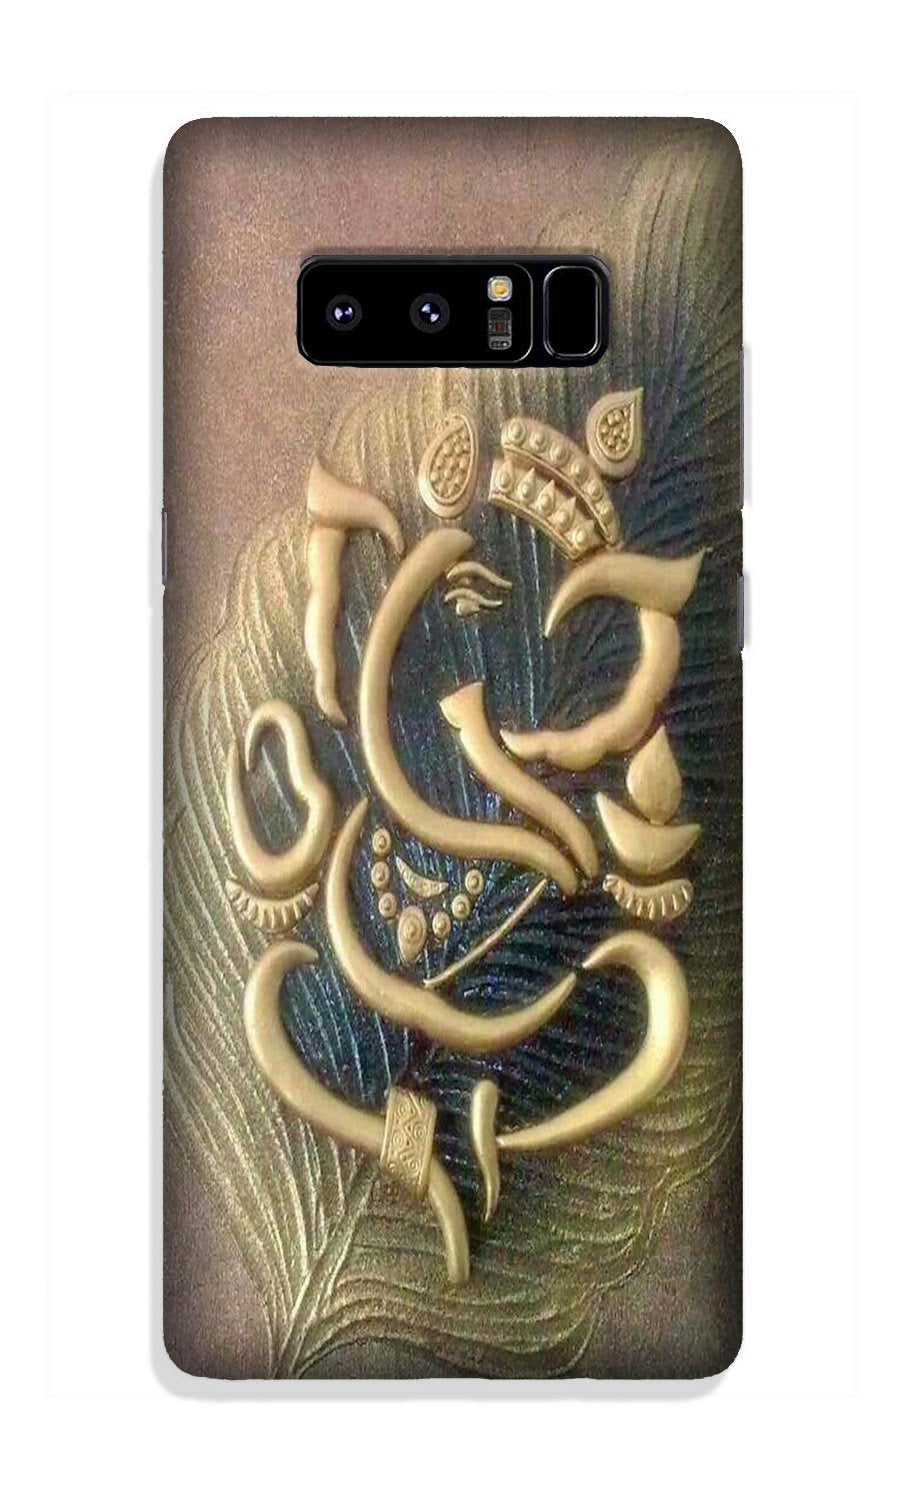 Lord Ganesha Case for Galaxy Note 8